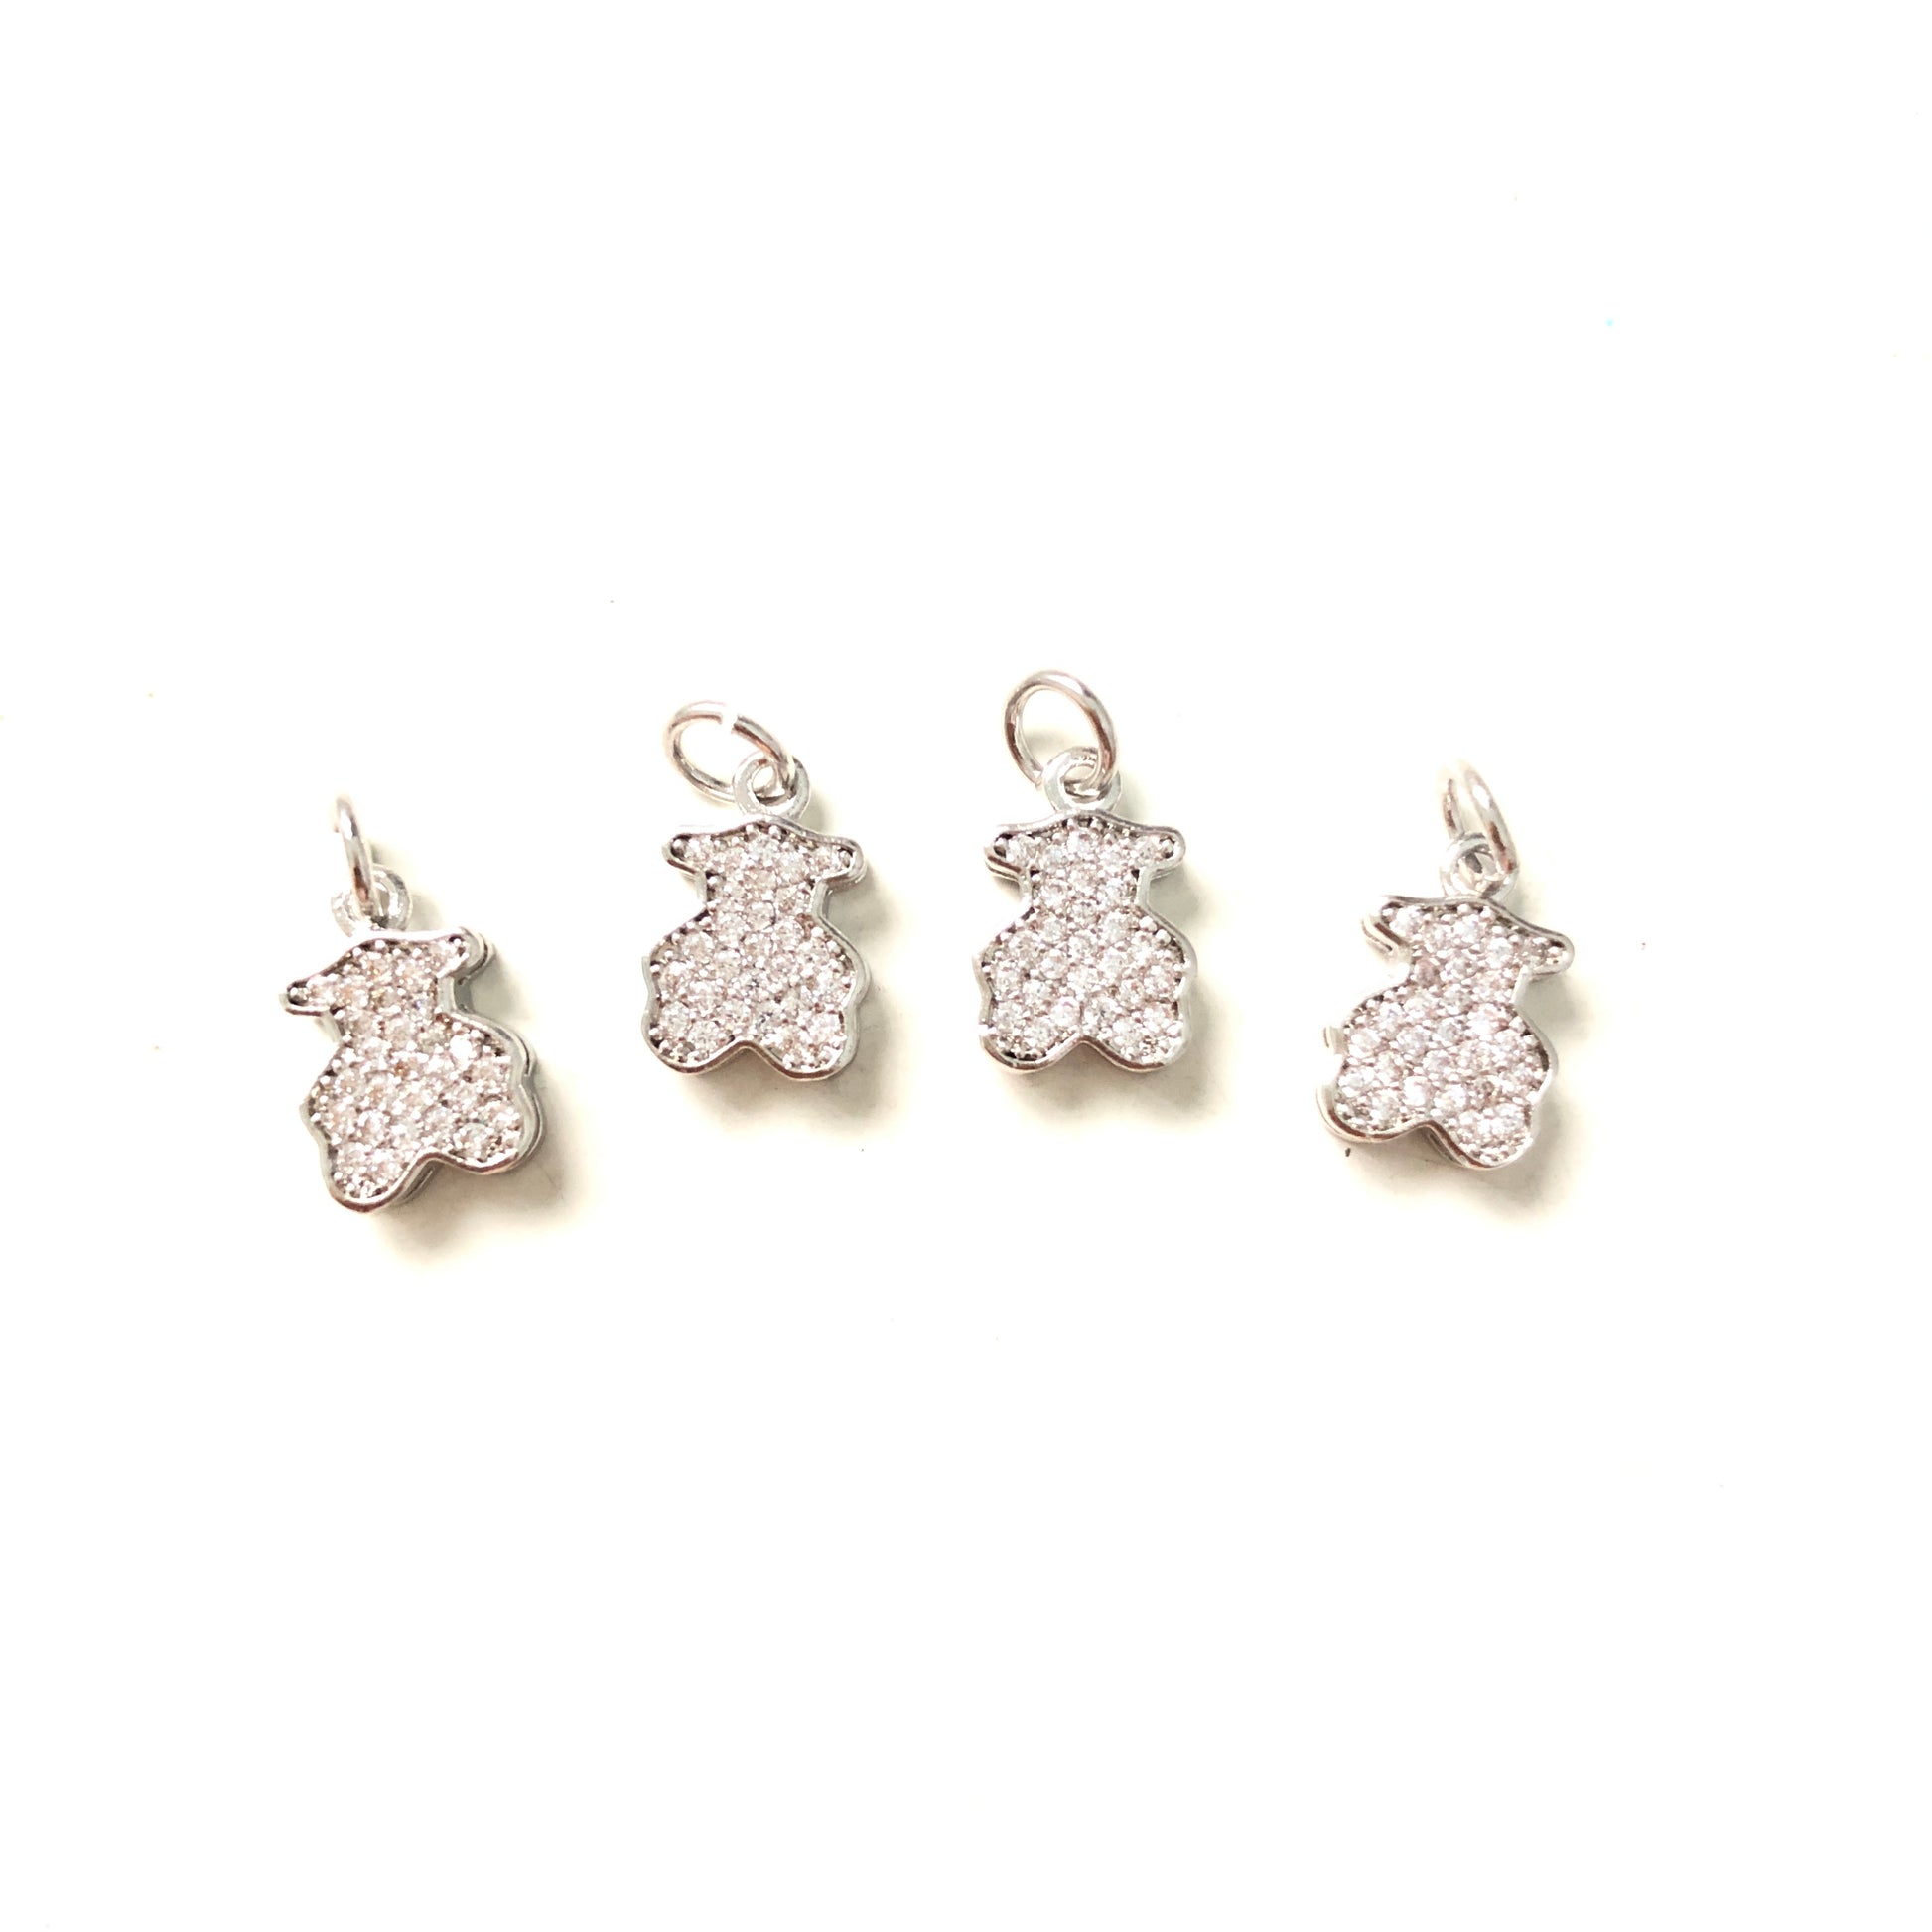 10pcs/lot 12*8mm CZ Paved Bear Charms Silver CZ Paved Charms Animals & Insects Small Sizes Charms Beads Beyond